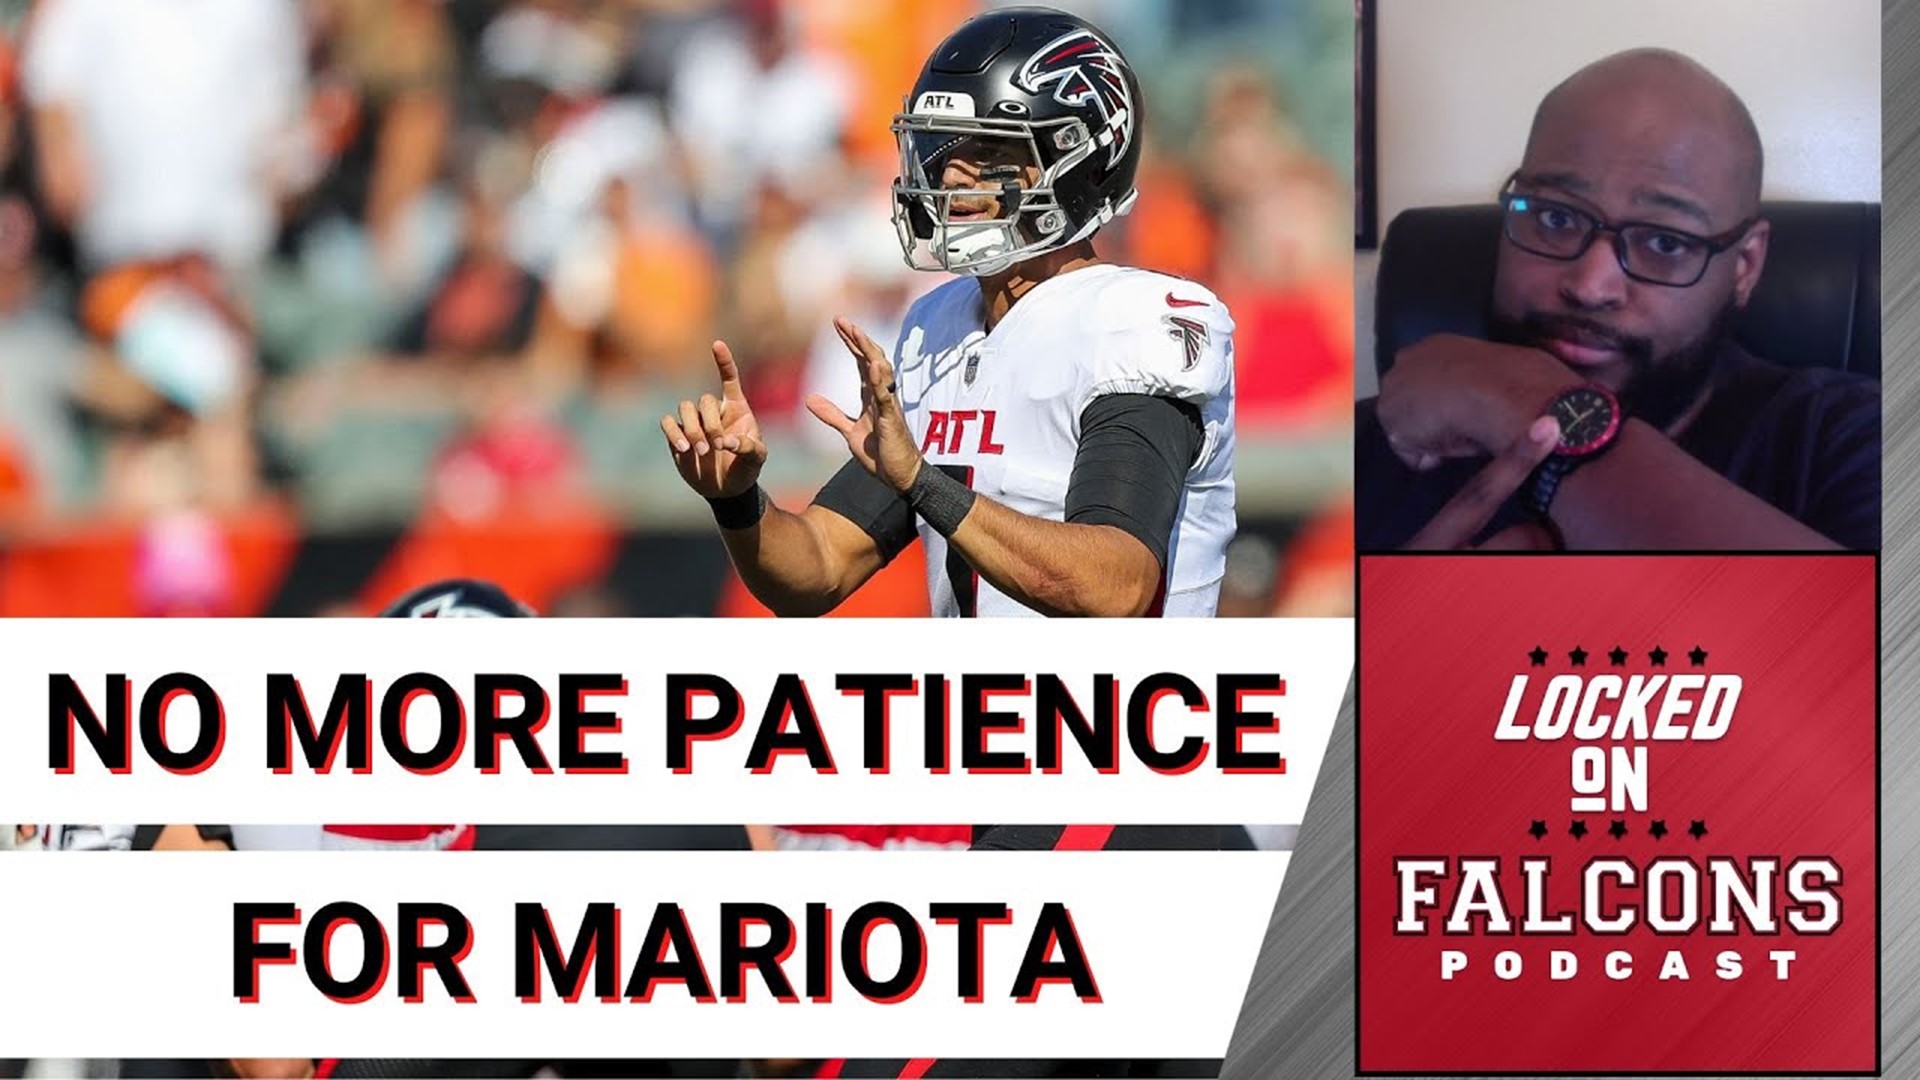 Patience for Atlanta Falcons QB Marcus Mariota Wears Thin: Week 7 All-22  Film Review & Mailbag